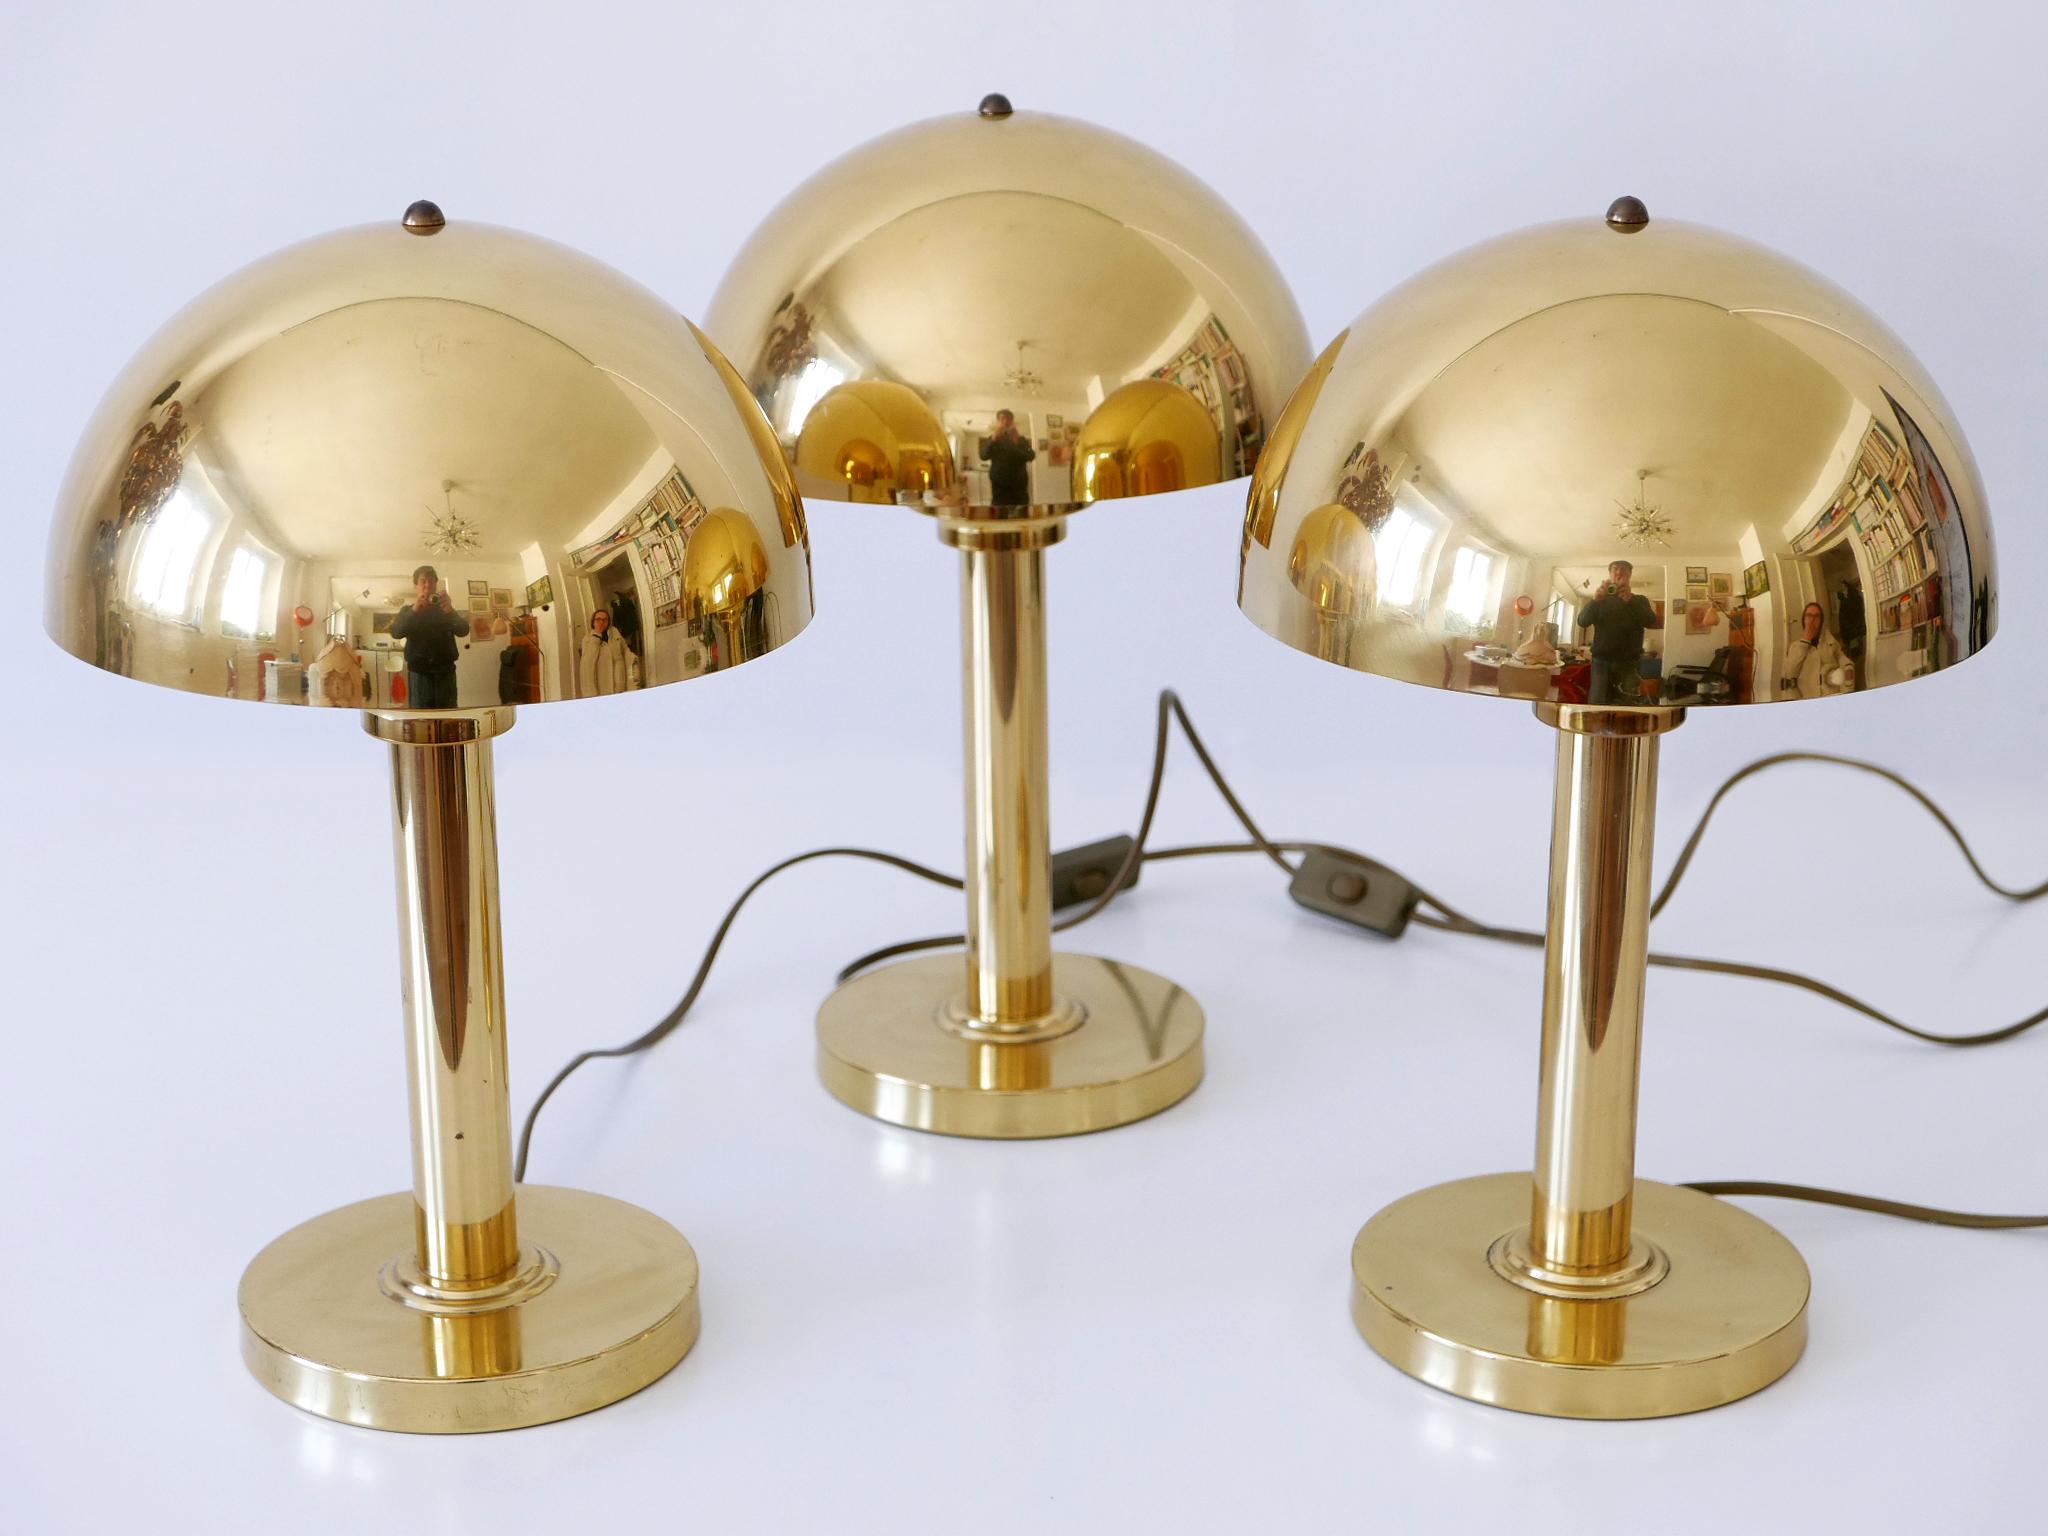 Elegant Mid-Century Modern Brass Table Lamps by WSB, Germany, 1960s For Sale 10